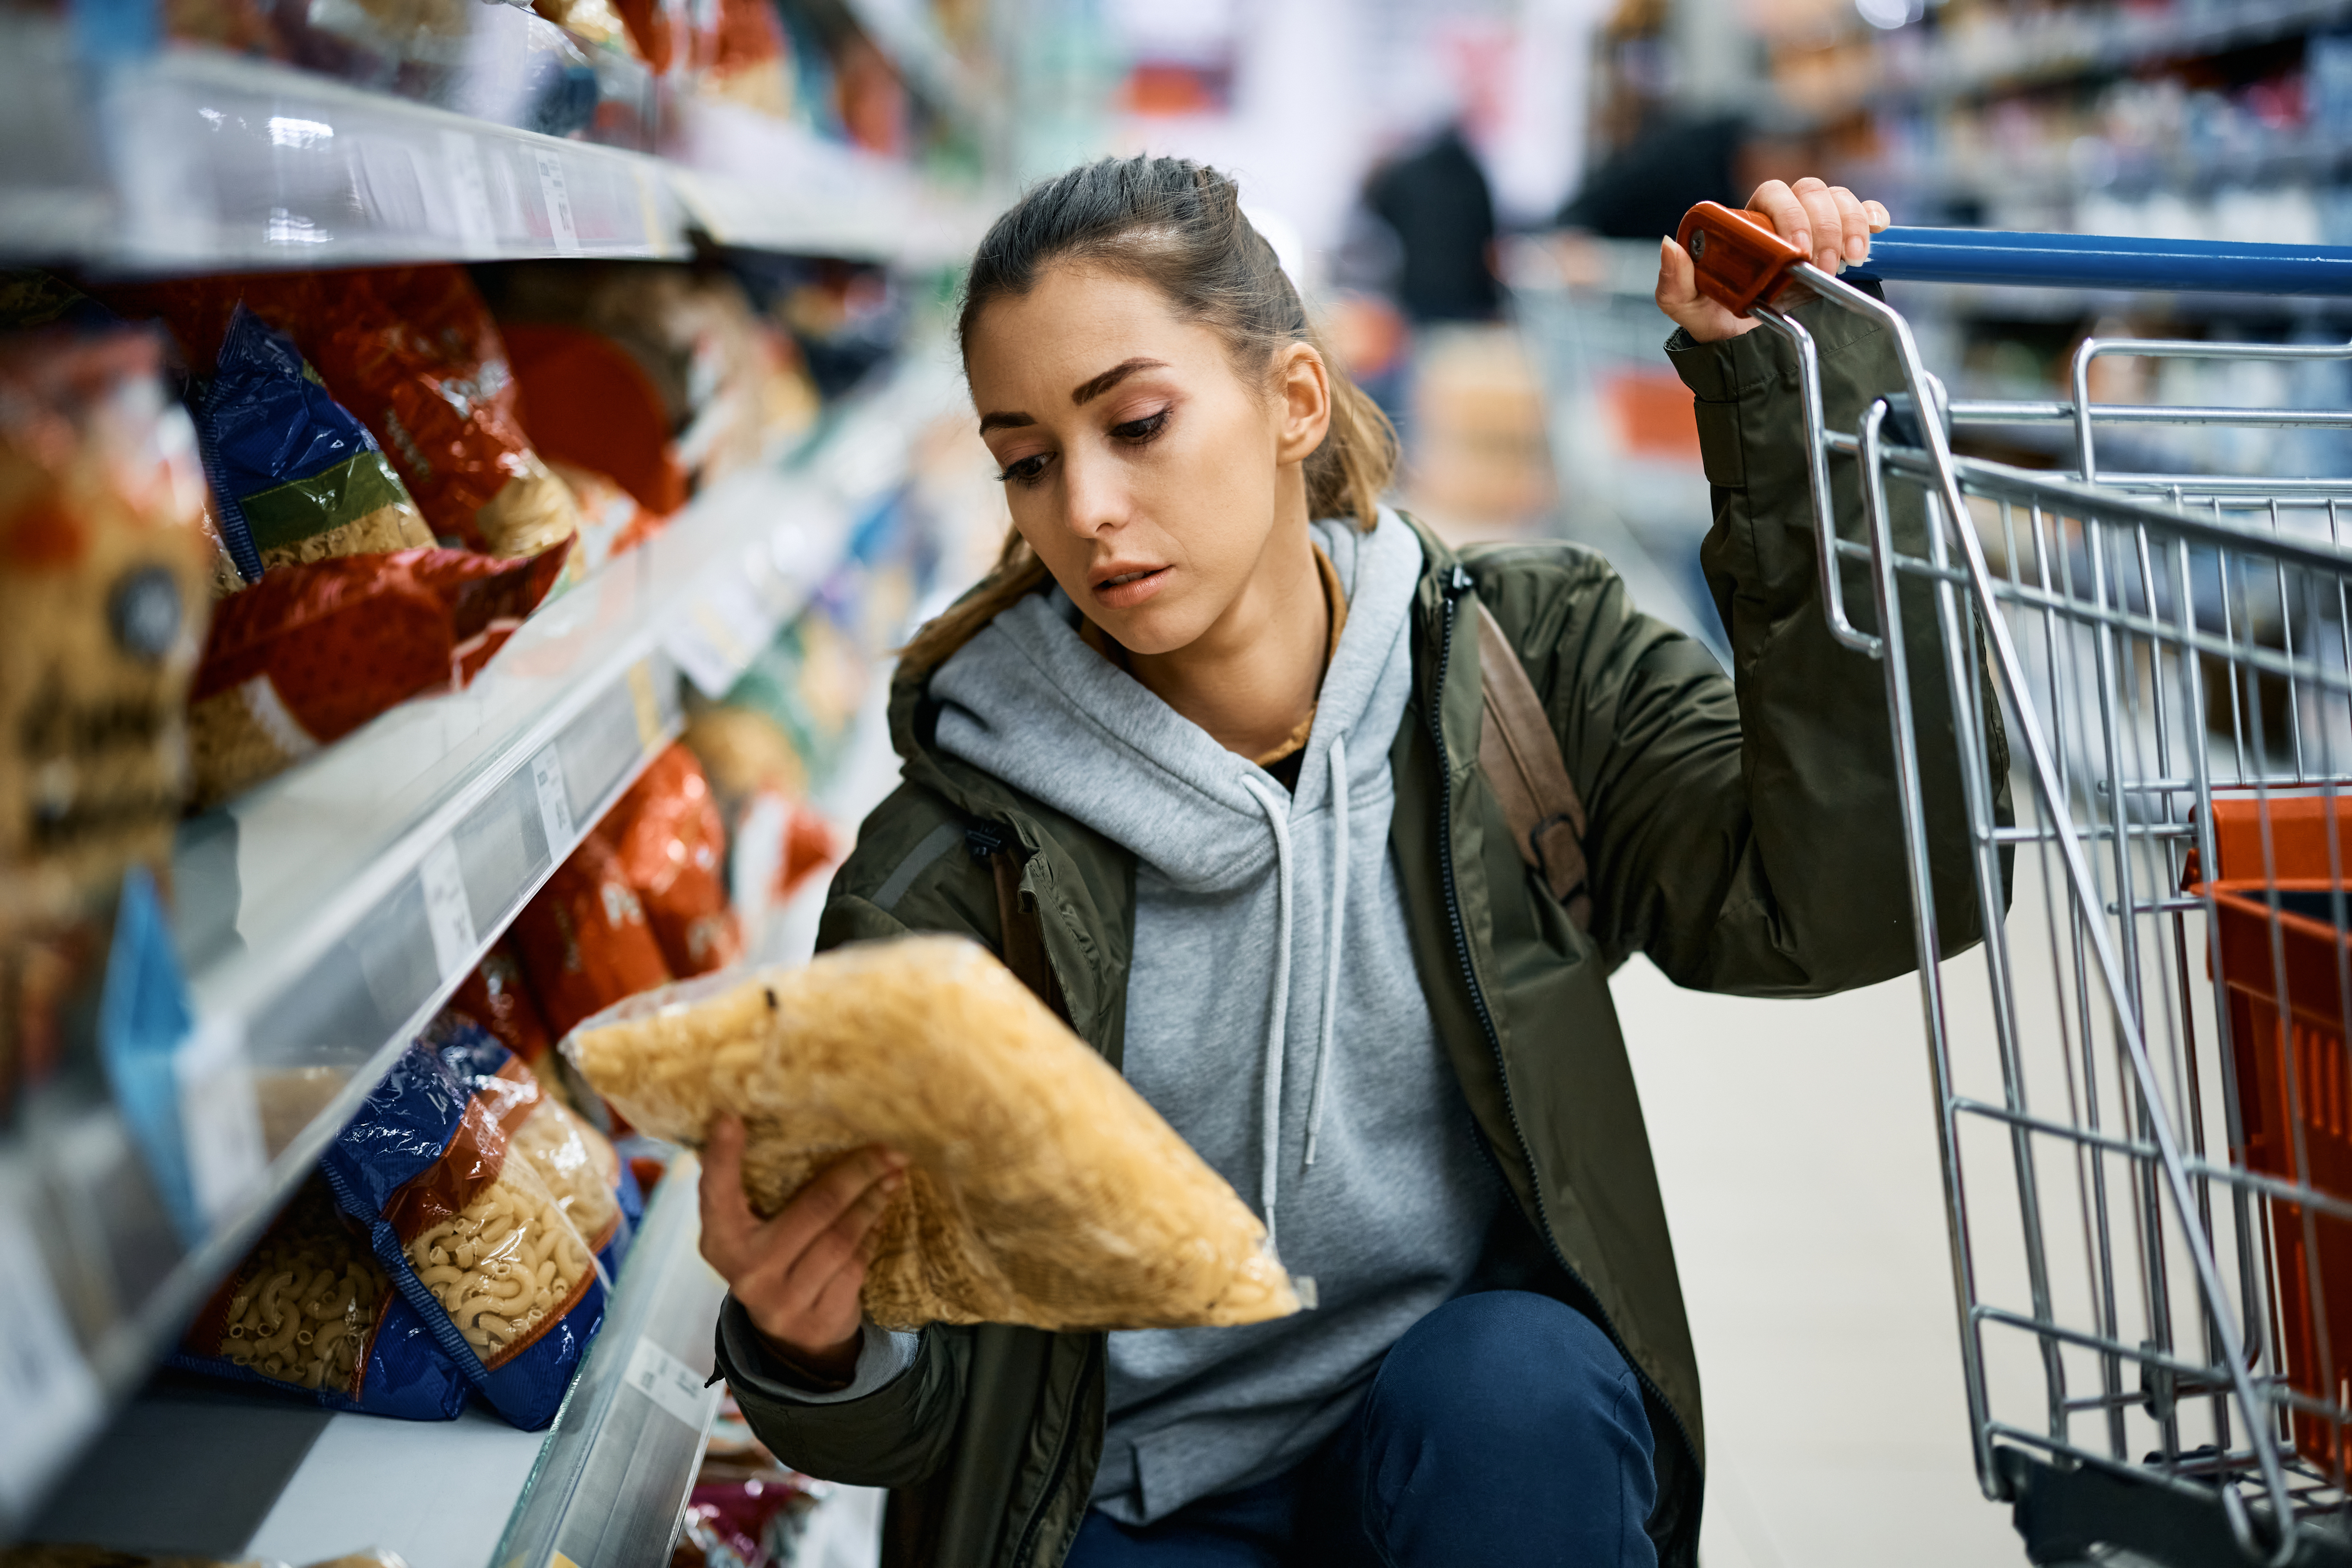 Lady holding, and looking at, a packet of pasta in the supermarket